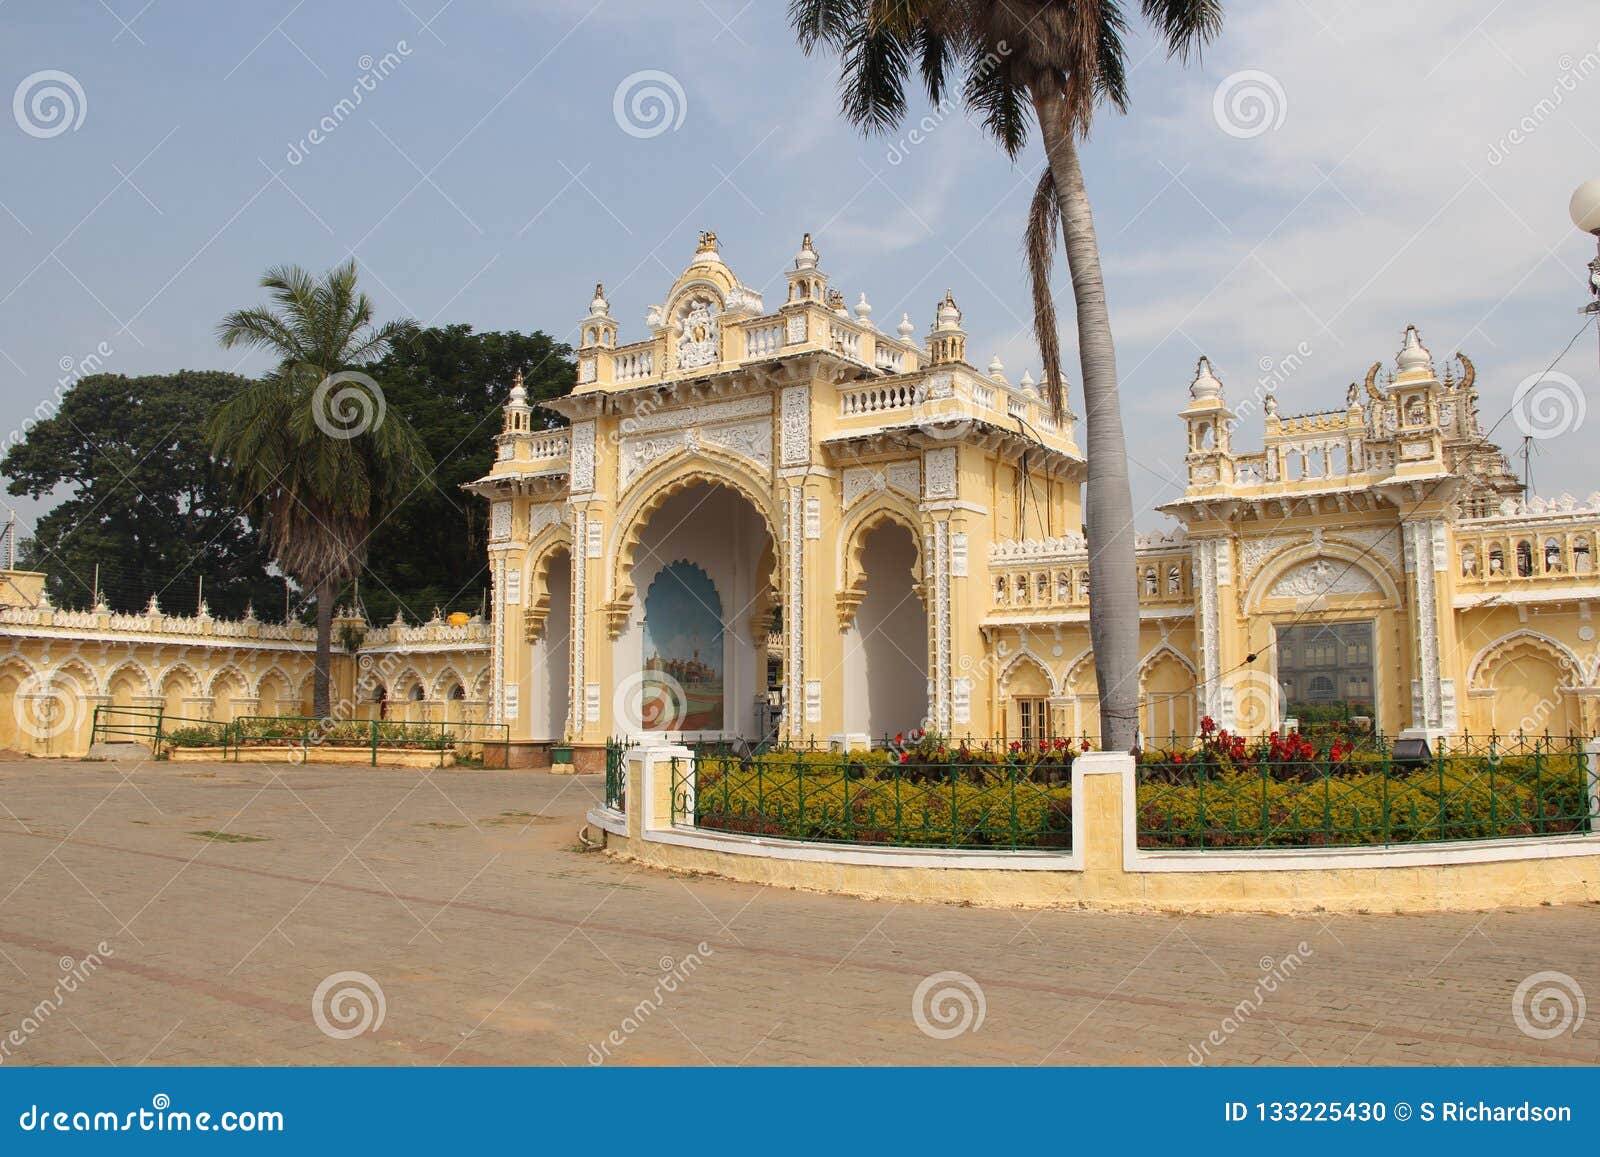 one of the entrances to mysore palace